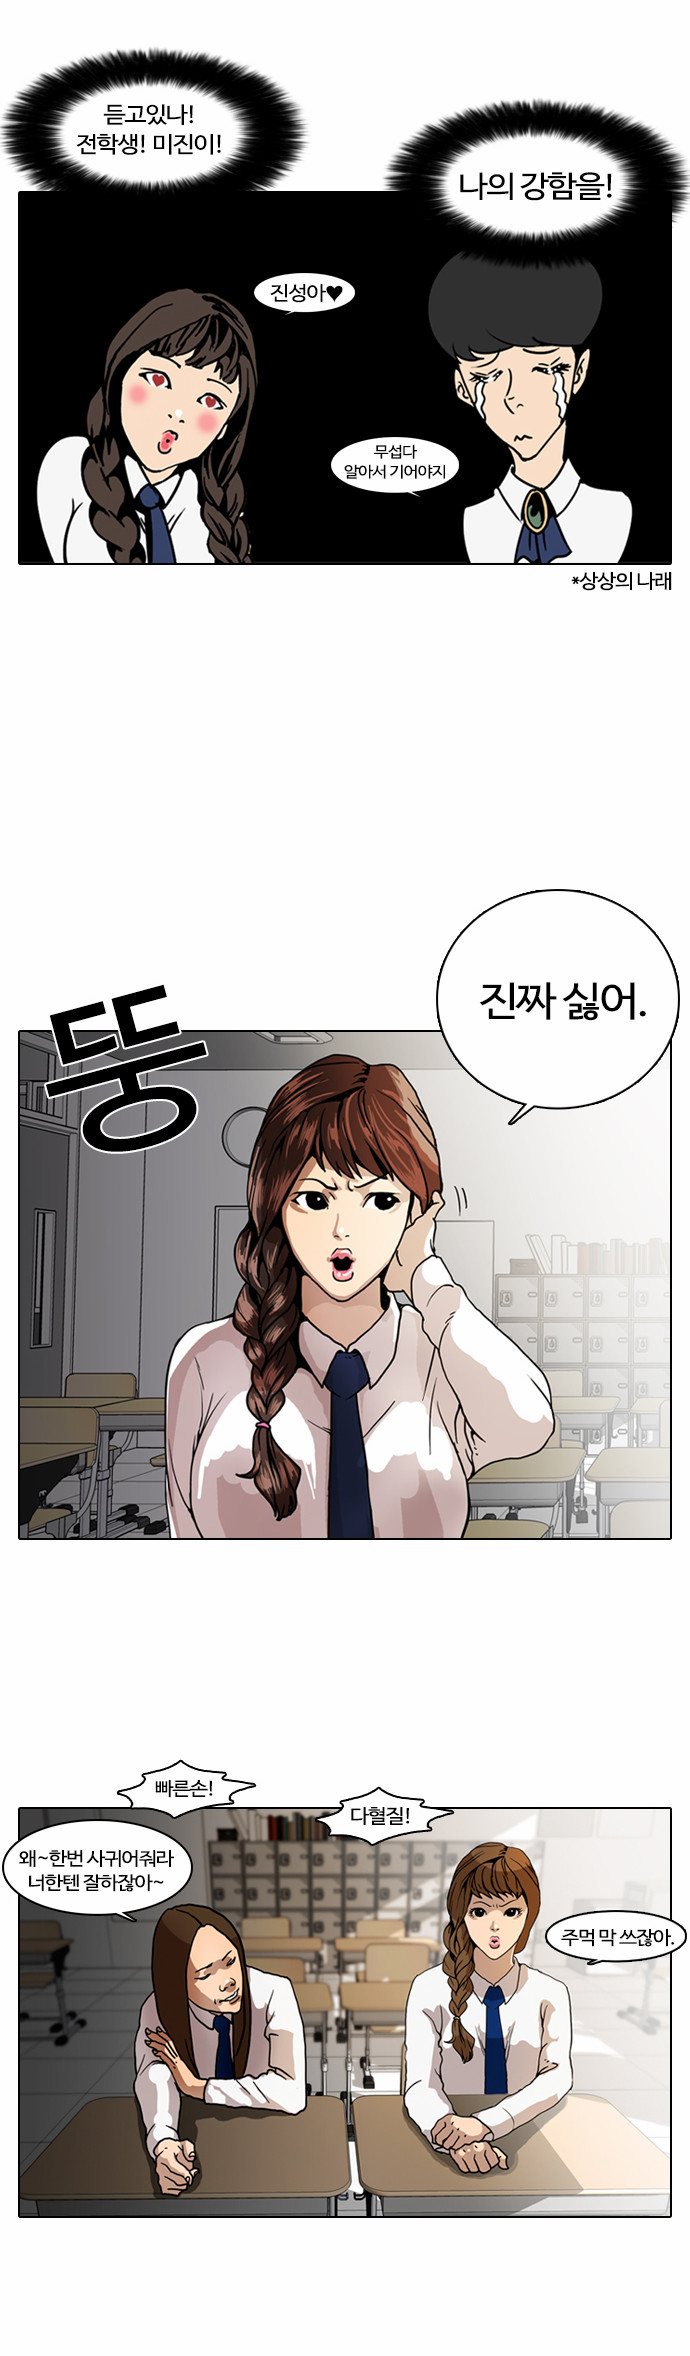 Lookism - Chapter 6 - Page 3